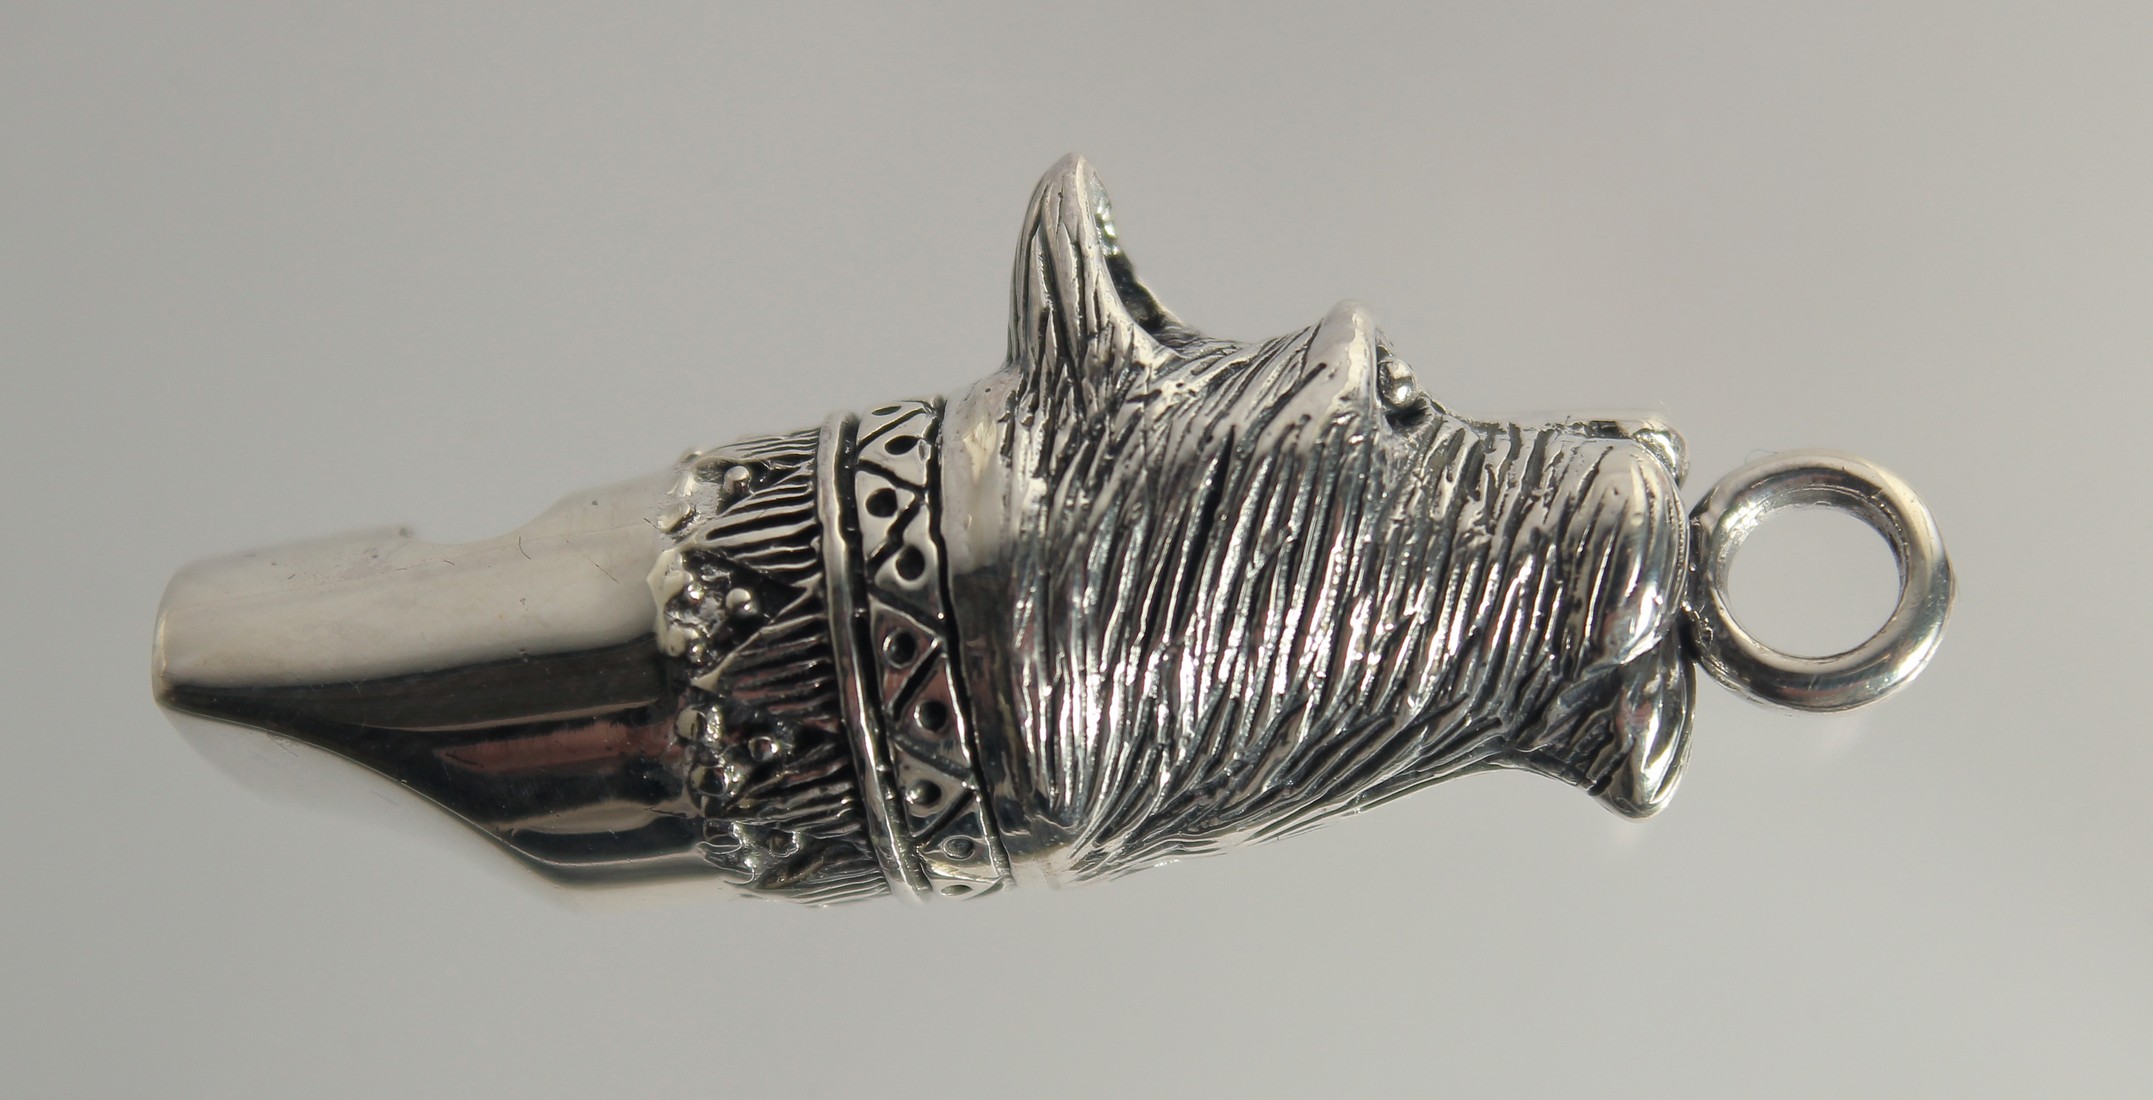 A SILVER NOVELTY SCOTTIE DOG WHISTLE, 1.75" LONG. - Image 2 of 3